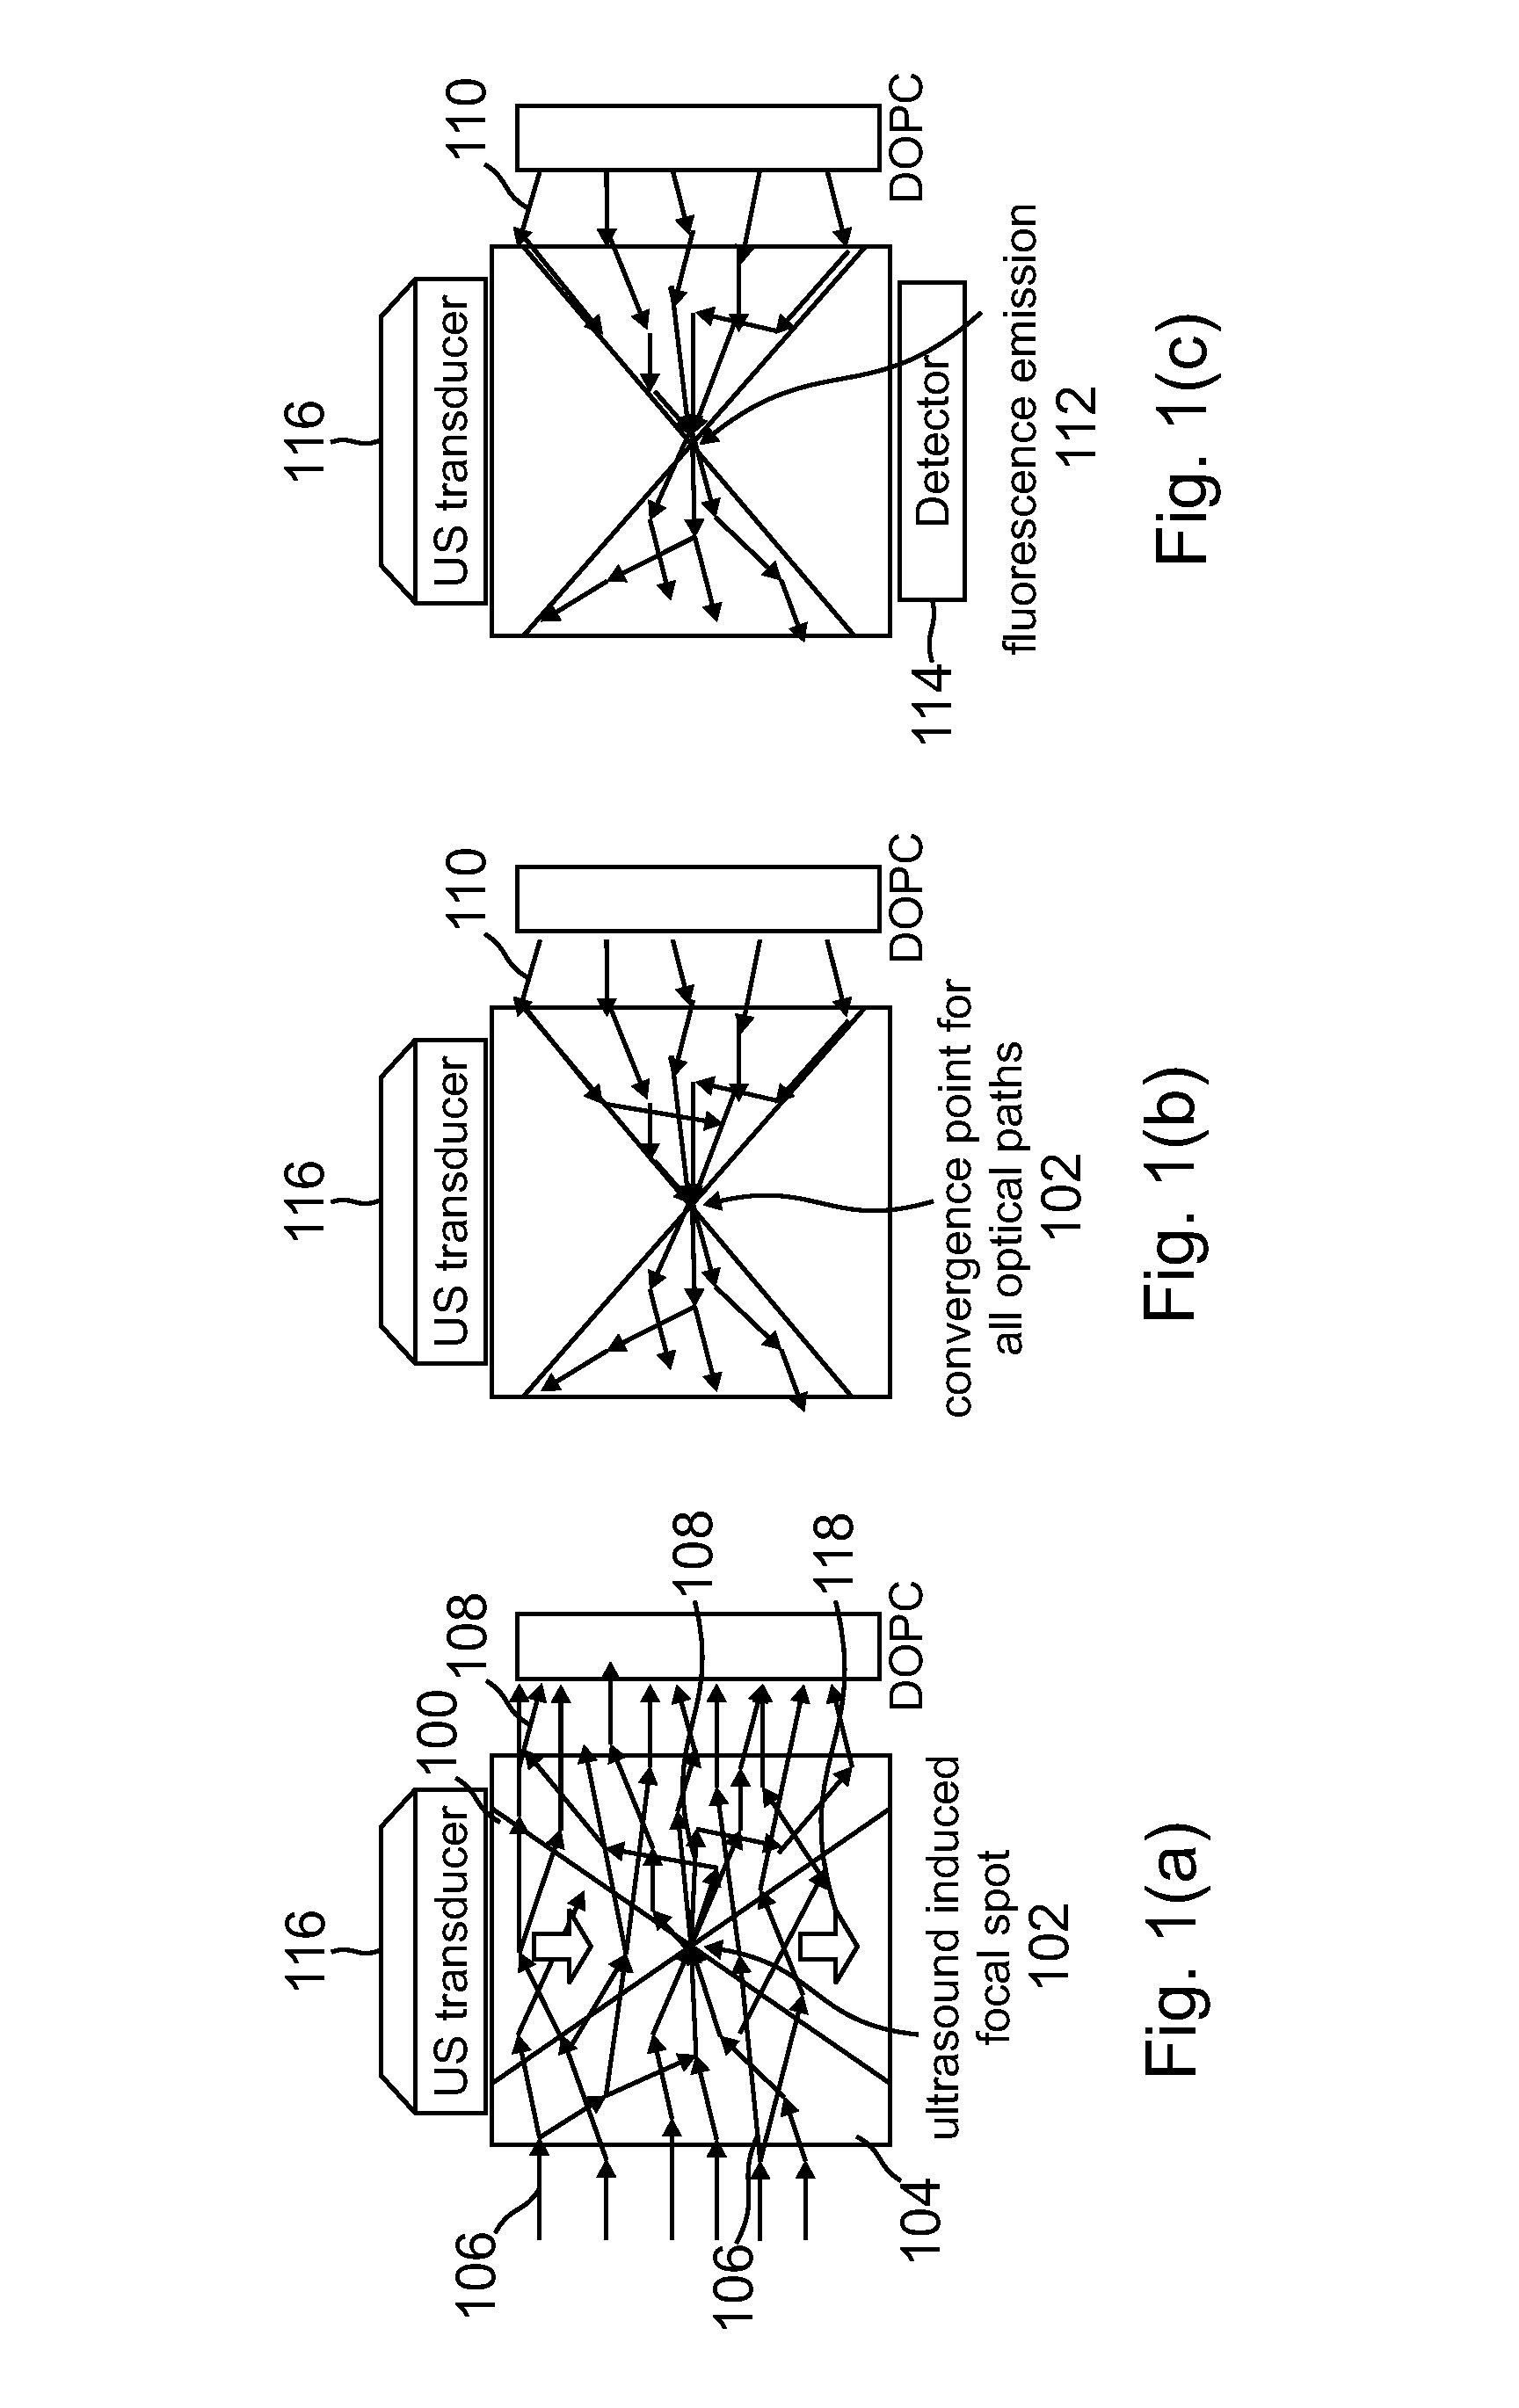 Acoustic assisted phase conjugate optical tomography